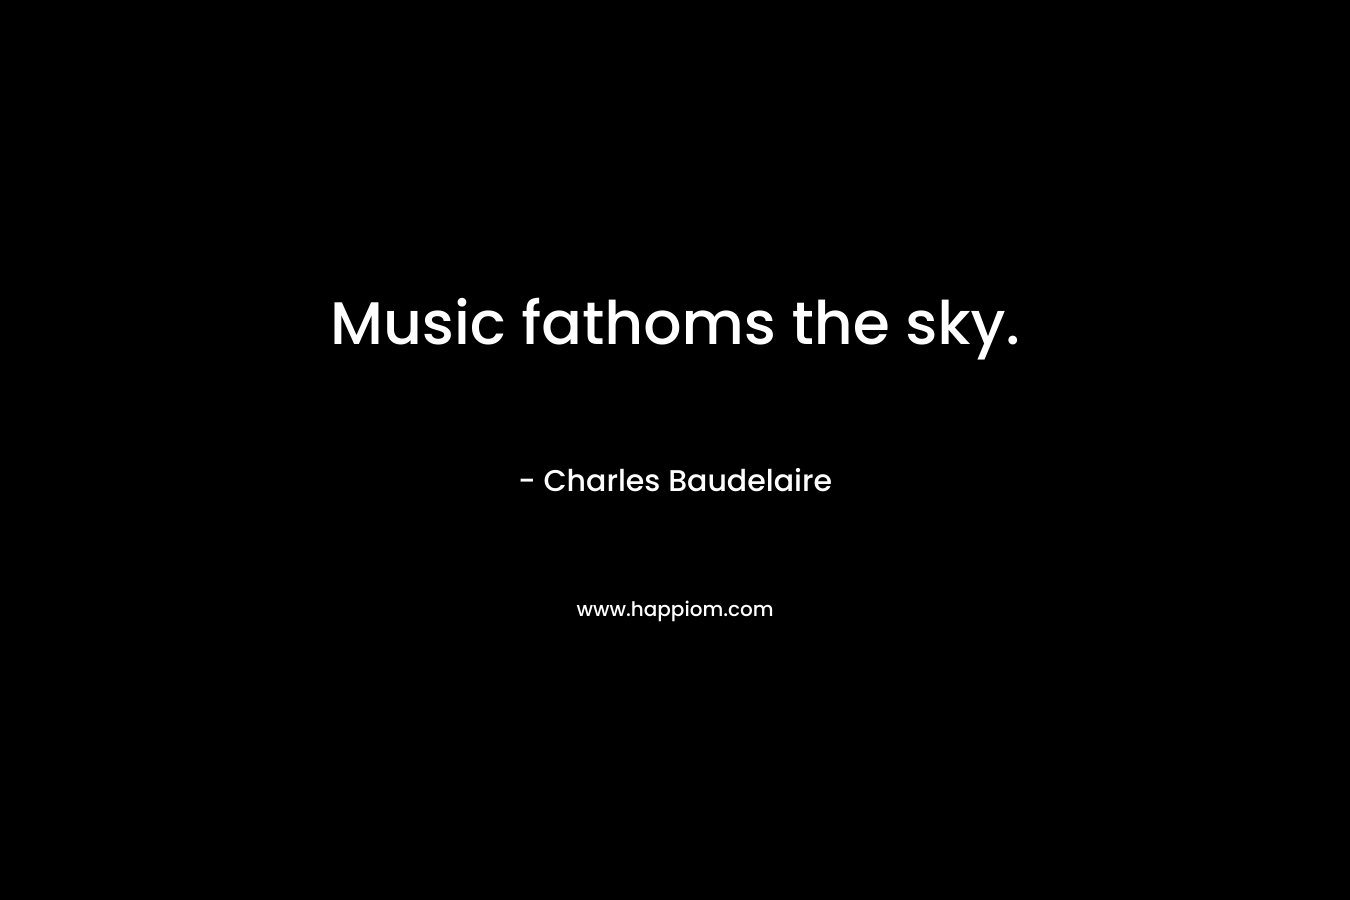 Music fathoms the sky. – Charles Baudelaire